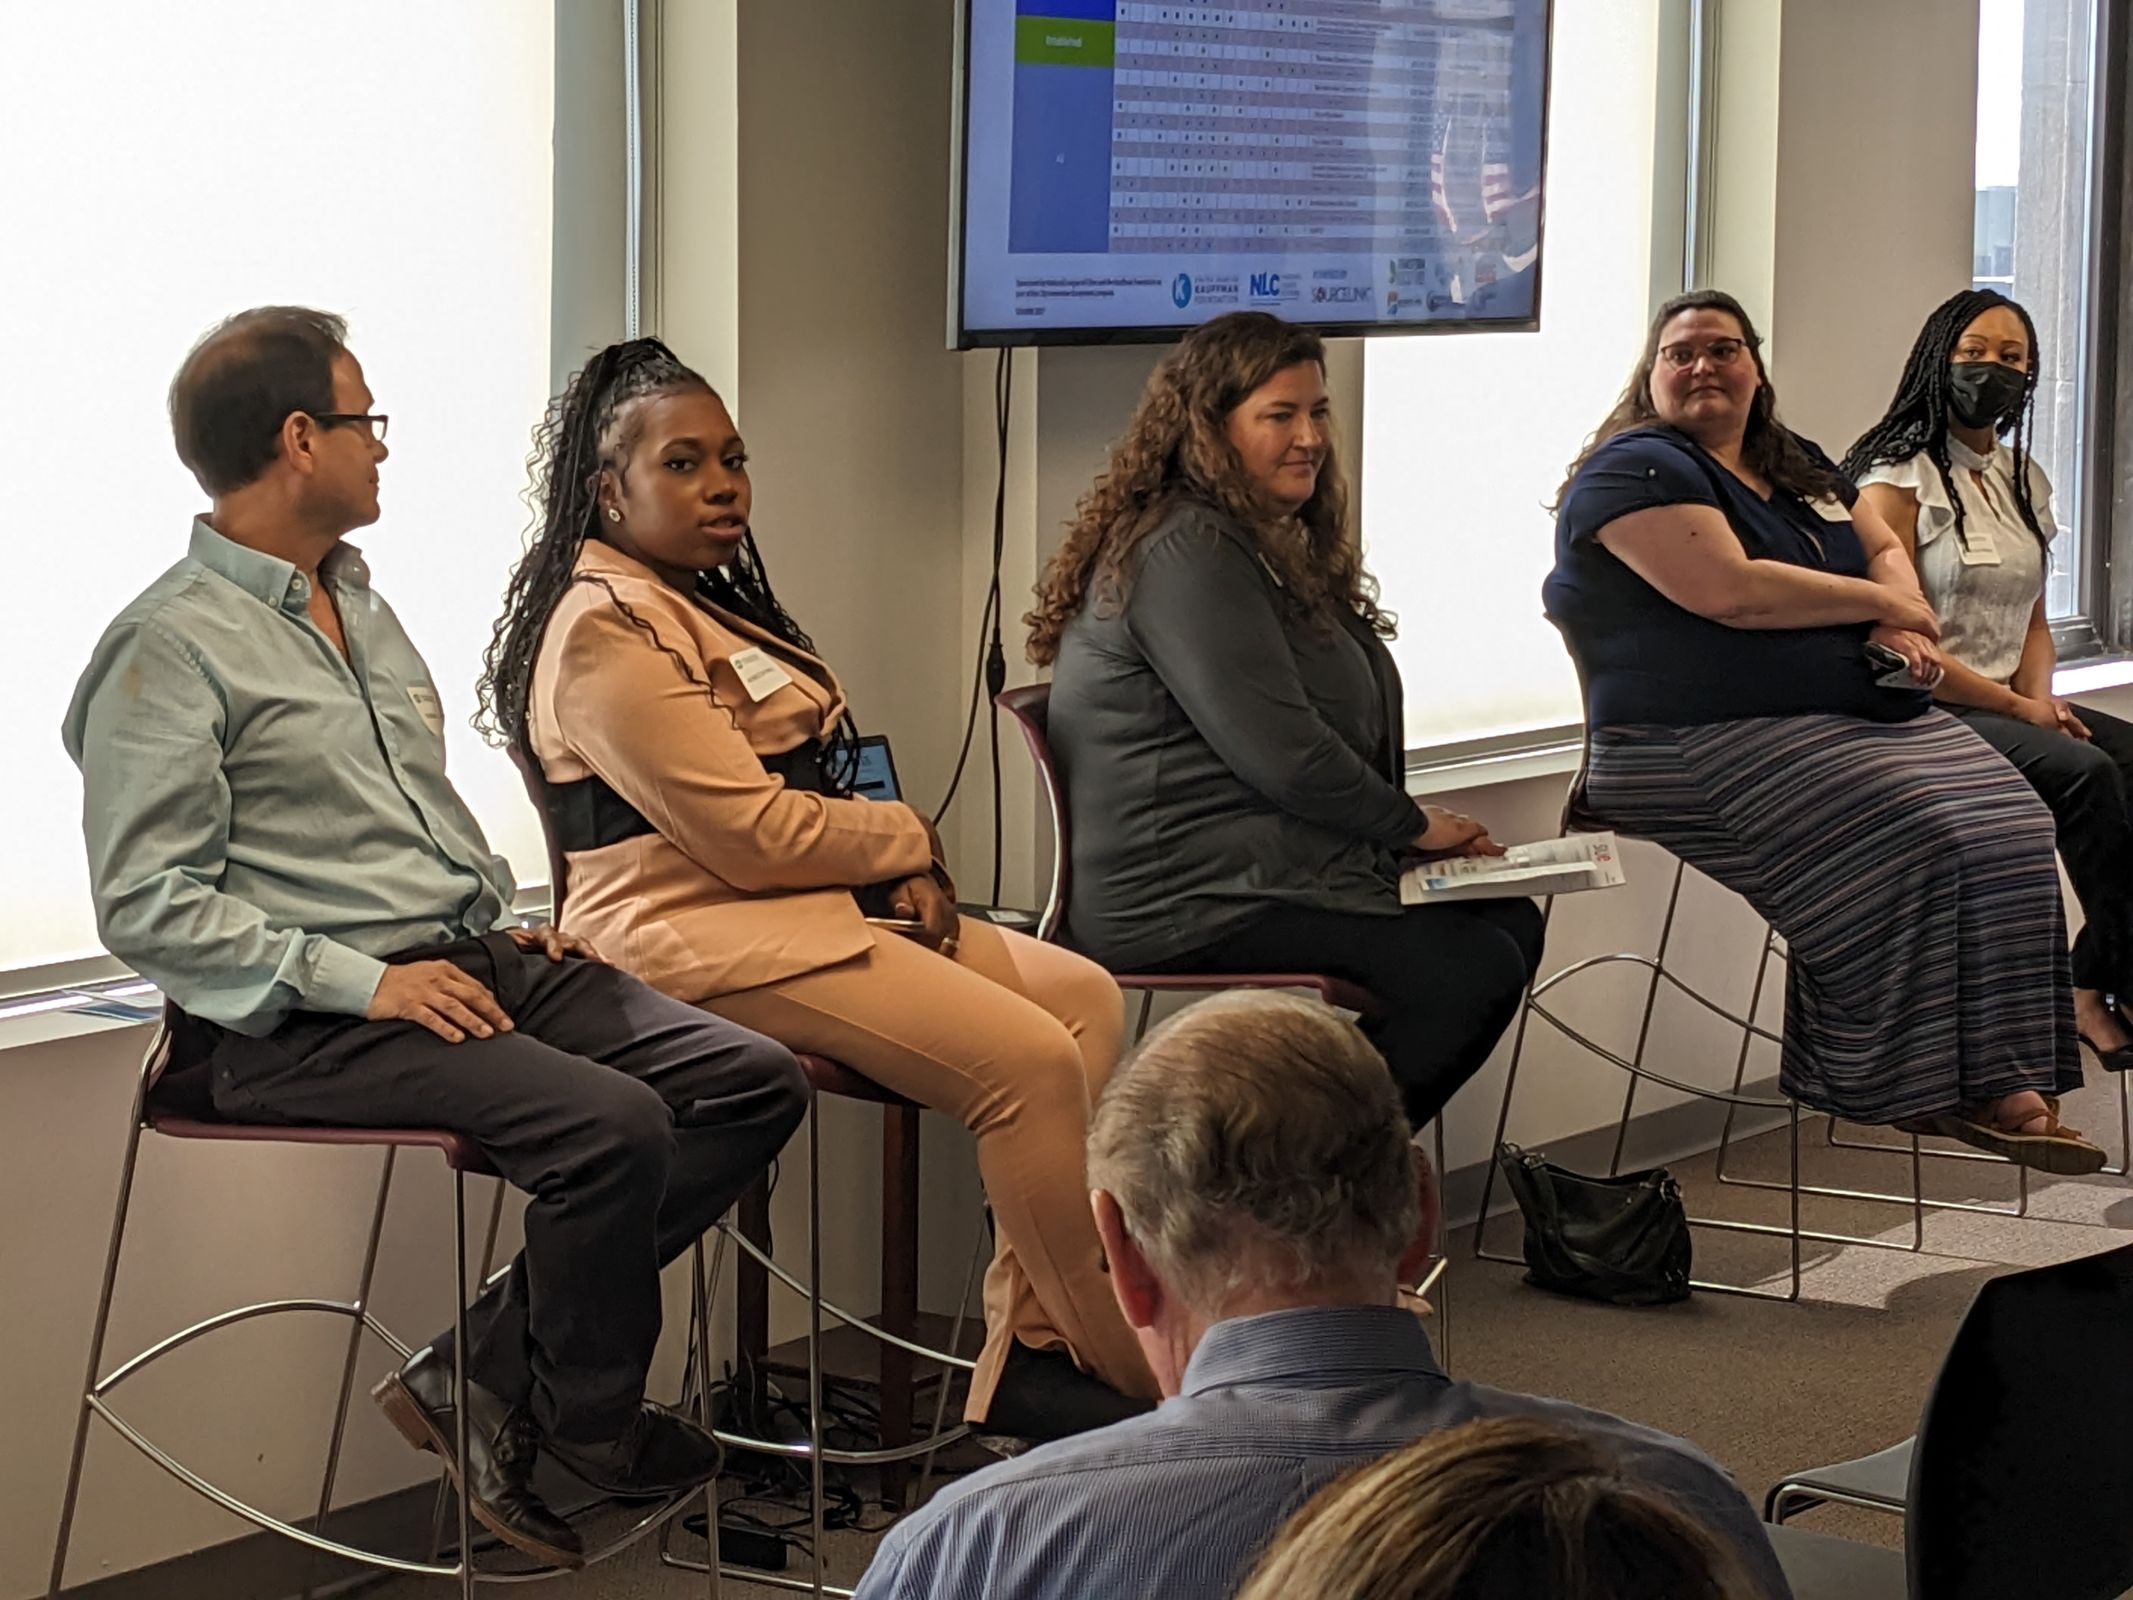 Panel I: Edward Caceres (SBDC), Rebecca Francis (Ignite Change Solutions LLC), Heather Wick (Growth Dimensions), Gina DelRose (City of Belvidere), and Francisca French (City of Rockford)